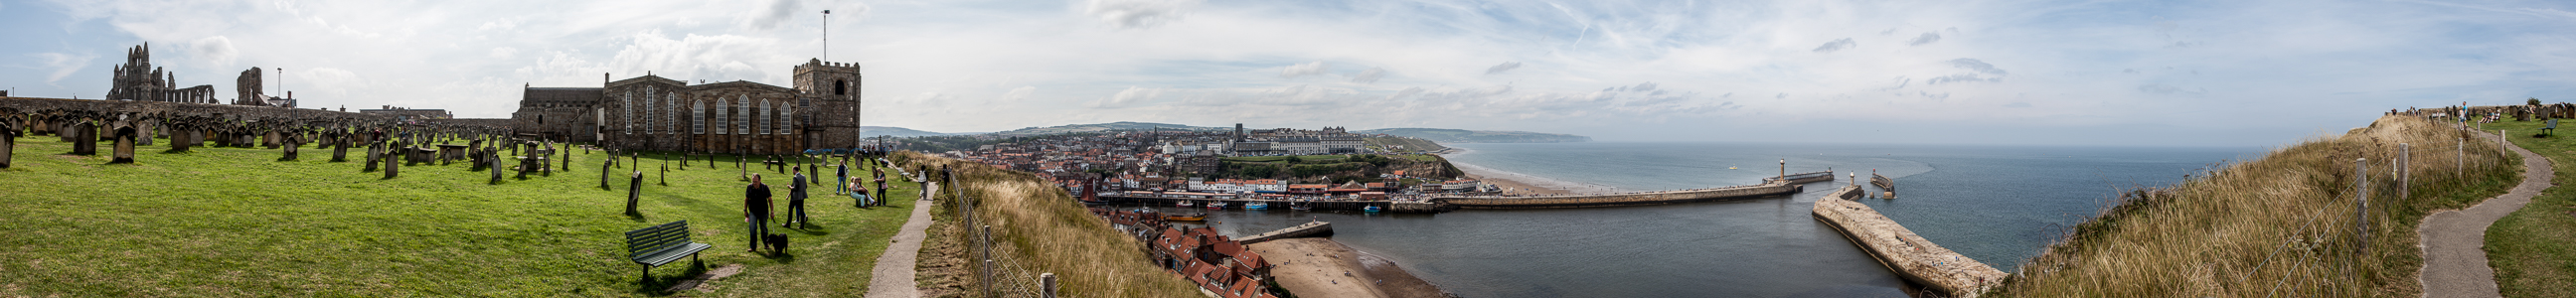 Whitby Abbey, St Mary's Churchyard, St Mary’s Church, Whitby Lower Harbour, West Pier, East Pier, Nordsee